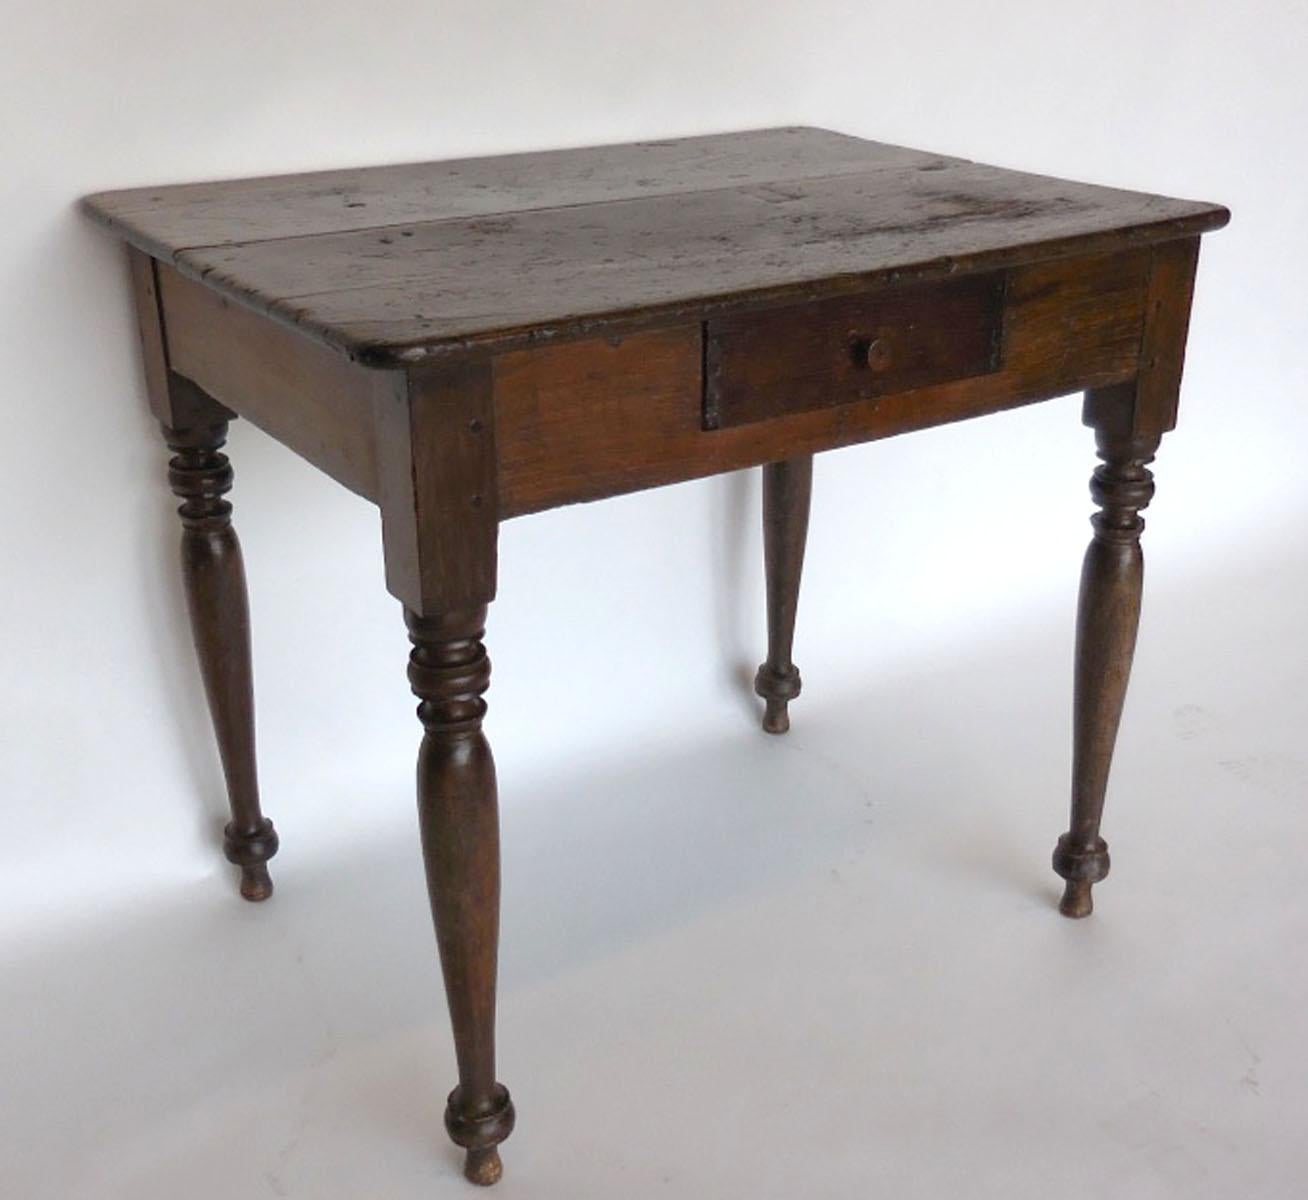 Spanish Colonial 19th Century Petite Desk or Side Table with Dovetailed Drawer